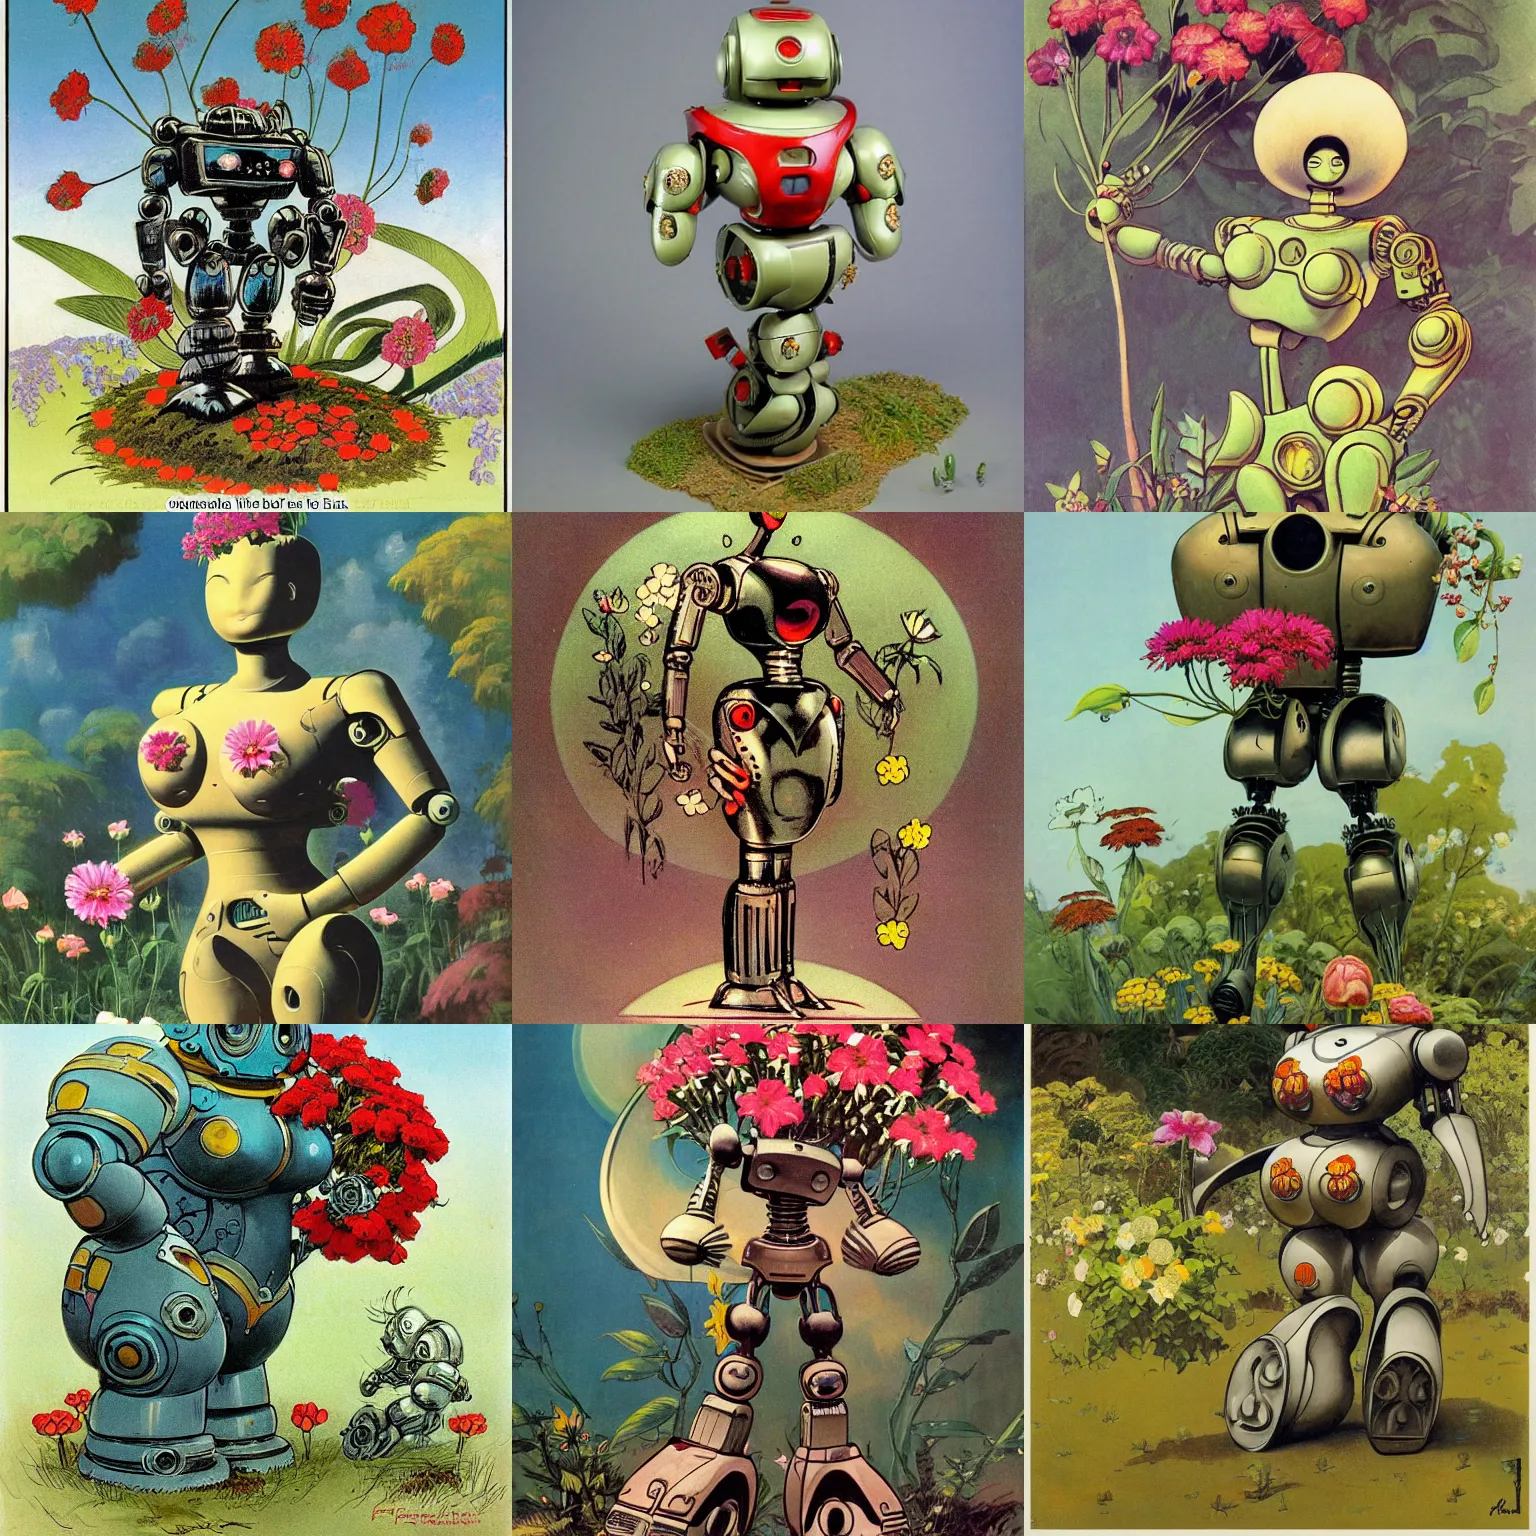 Prompt: curvaceous robot surrounded by growing flowers, spring, style of by Frank Frazetta